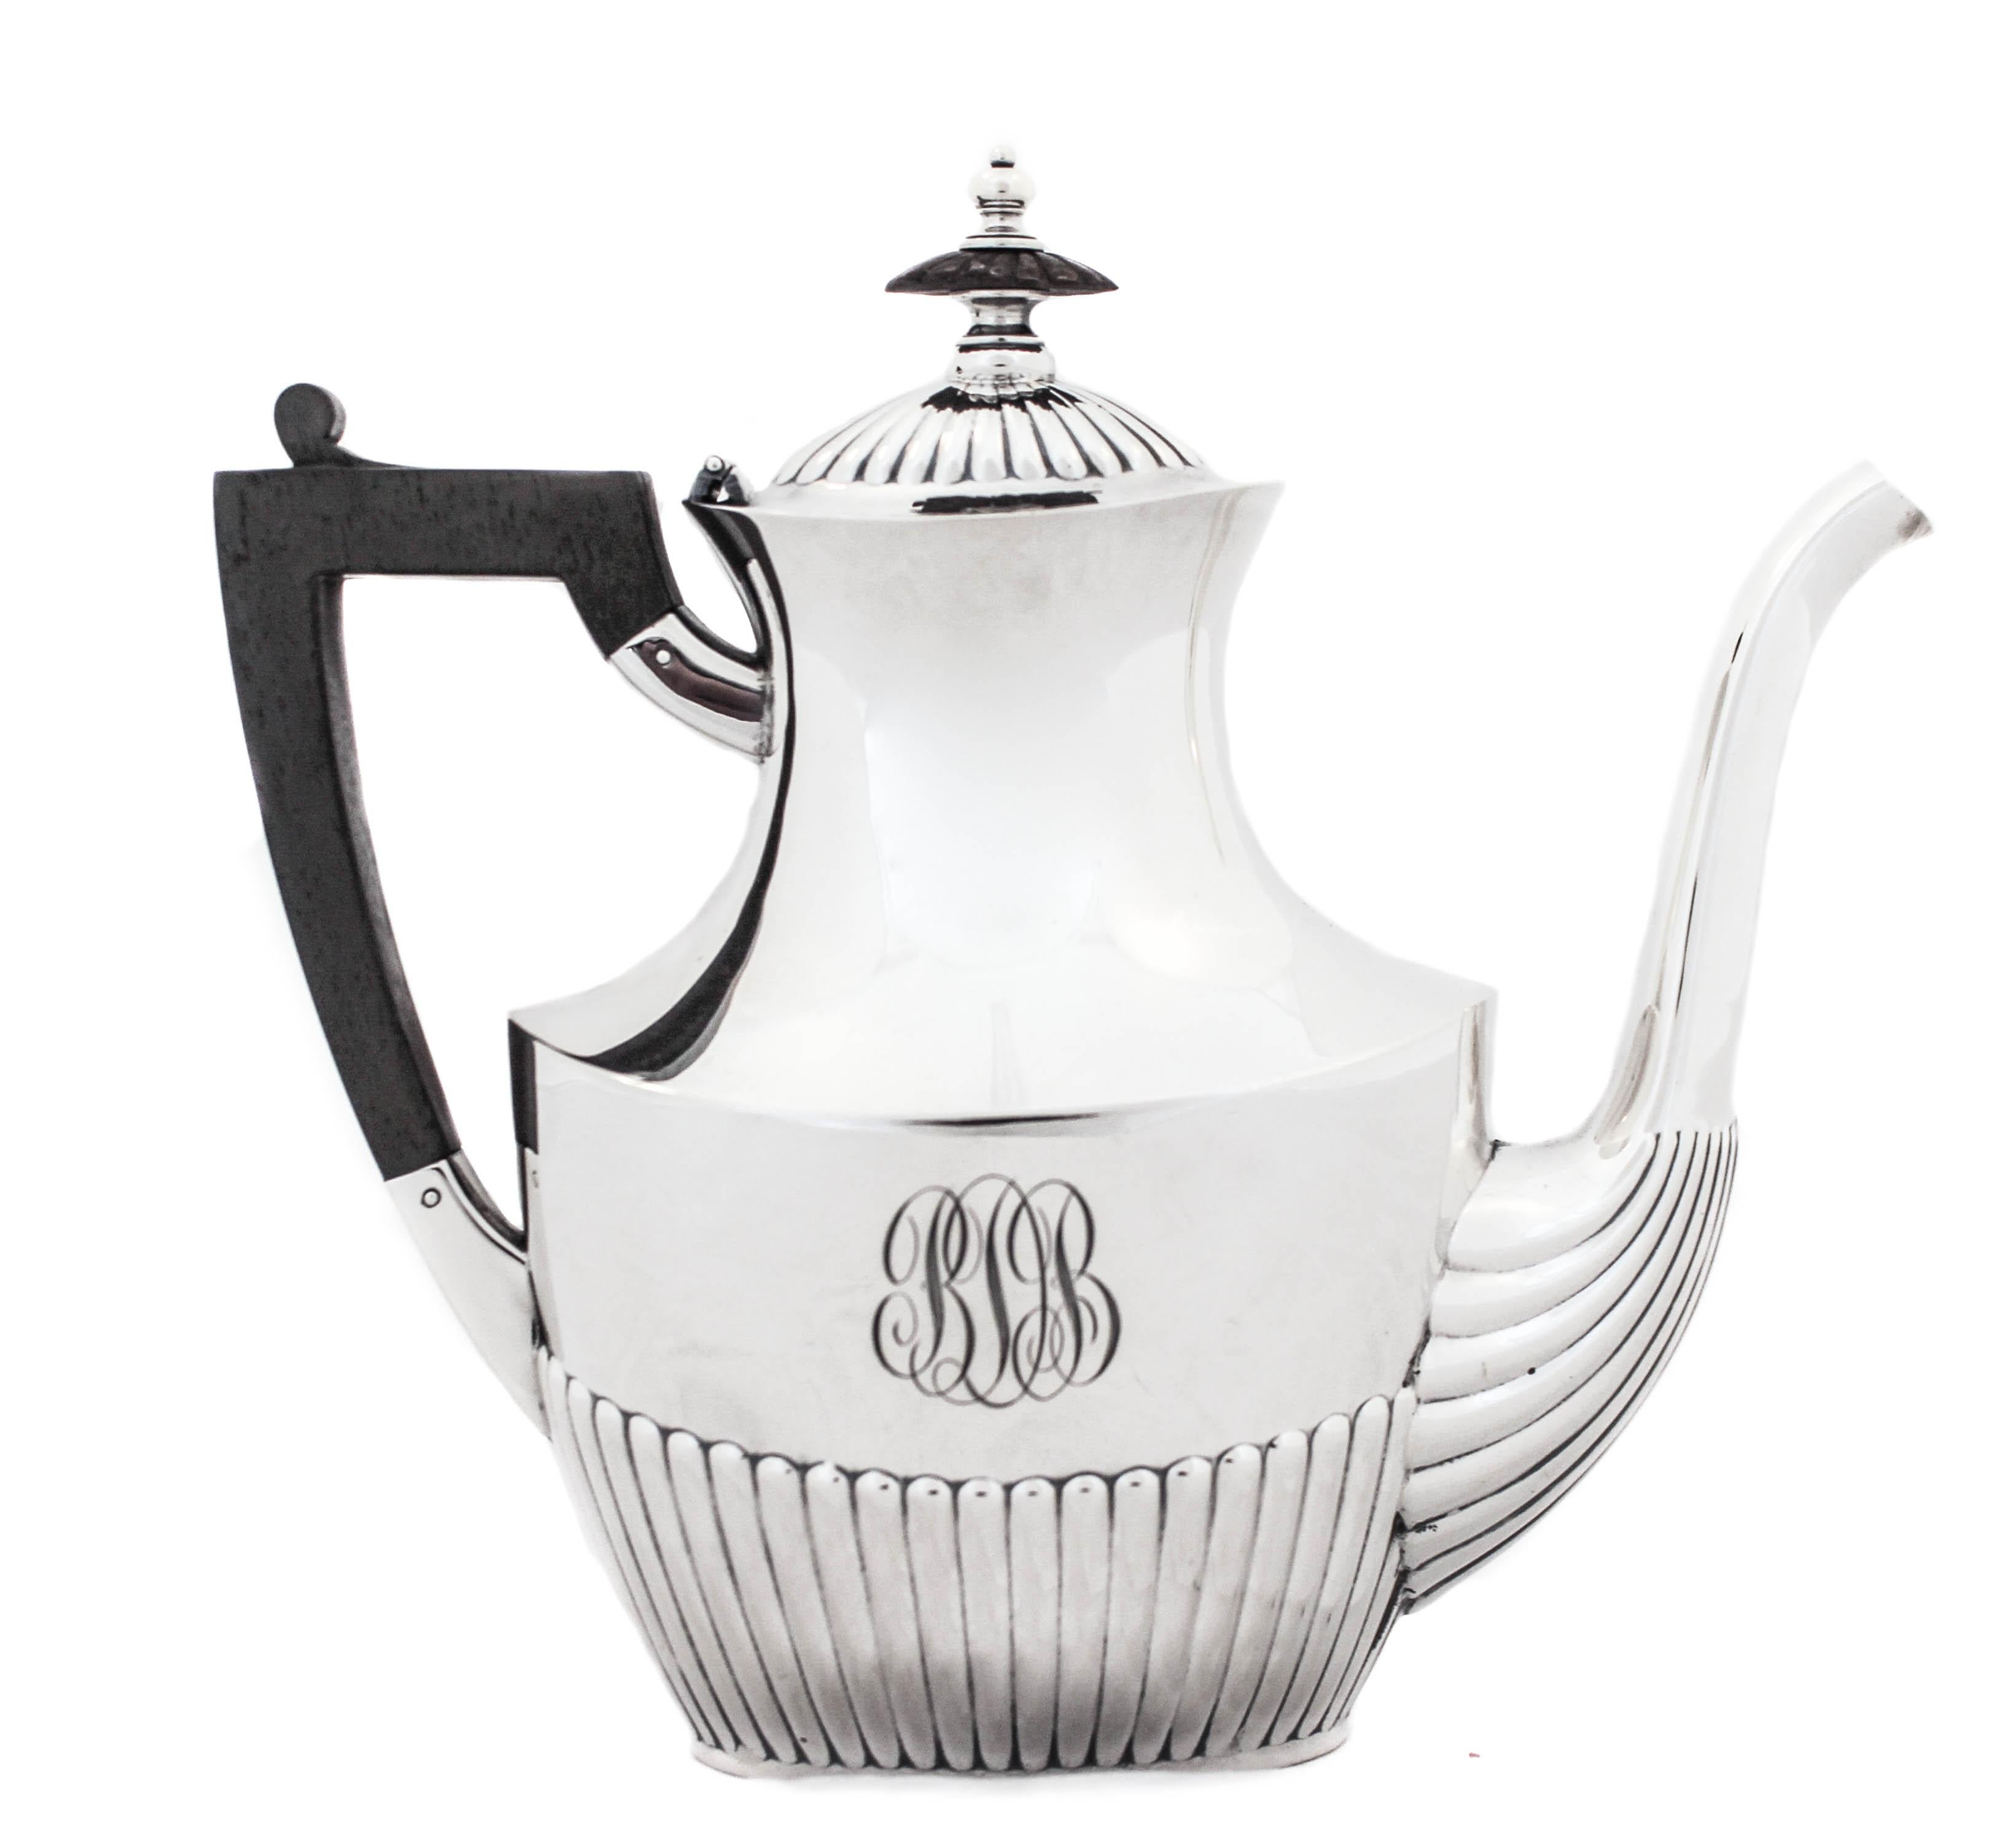 We are thrilled to offer you this sterling silver tea set by Gorham Silversmiths, hallmarked 1874. This one hundred and fifty years old set has been lovingly restored to it’s original beauty. We removed all the dents, dings and scratches but made